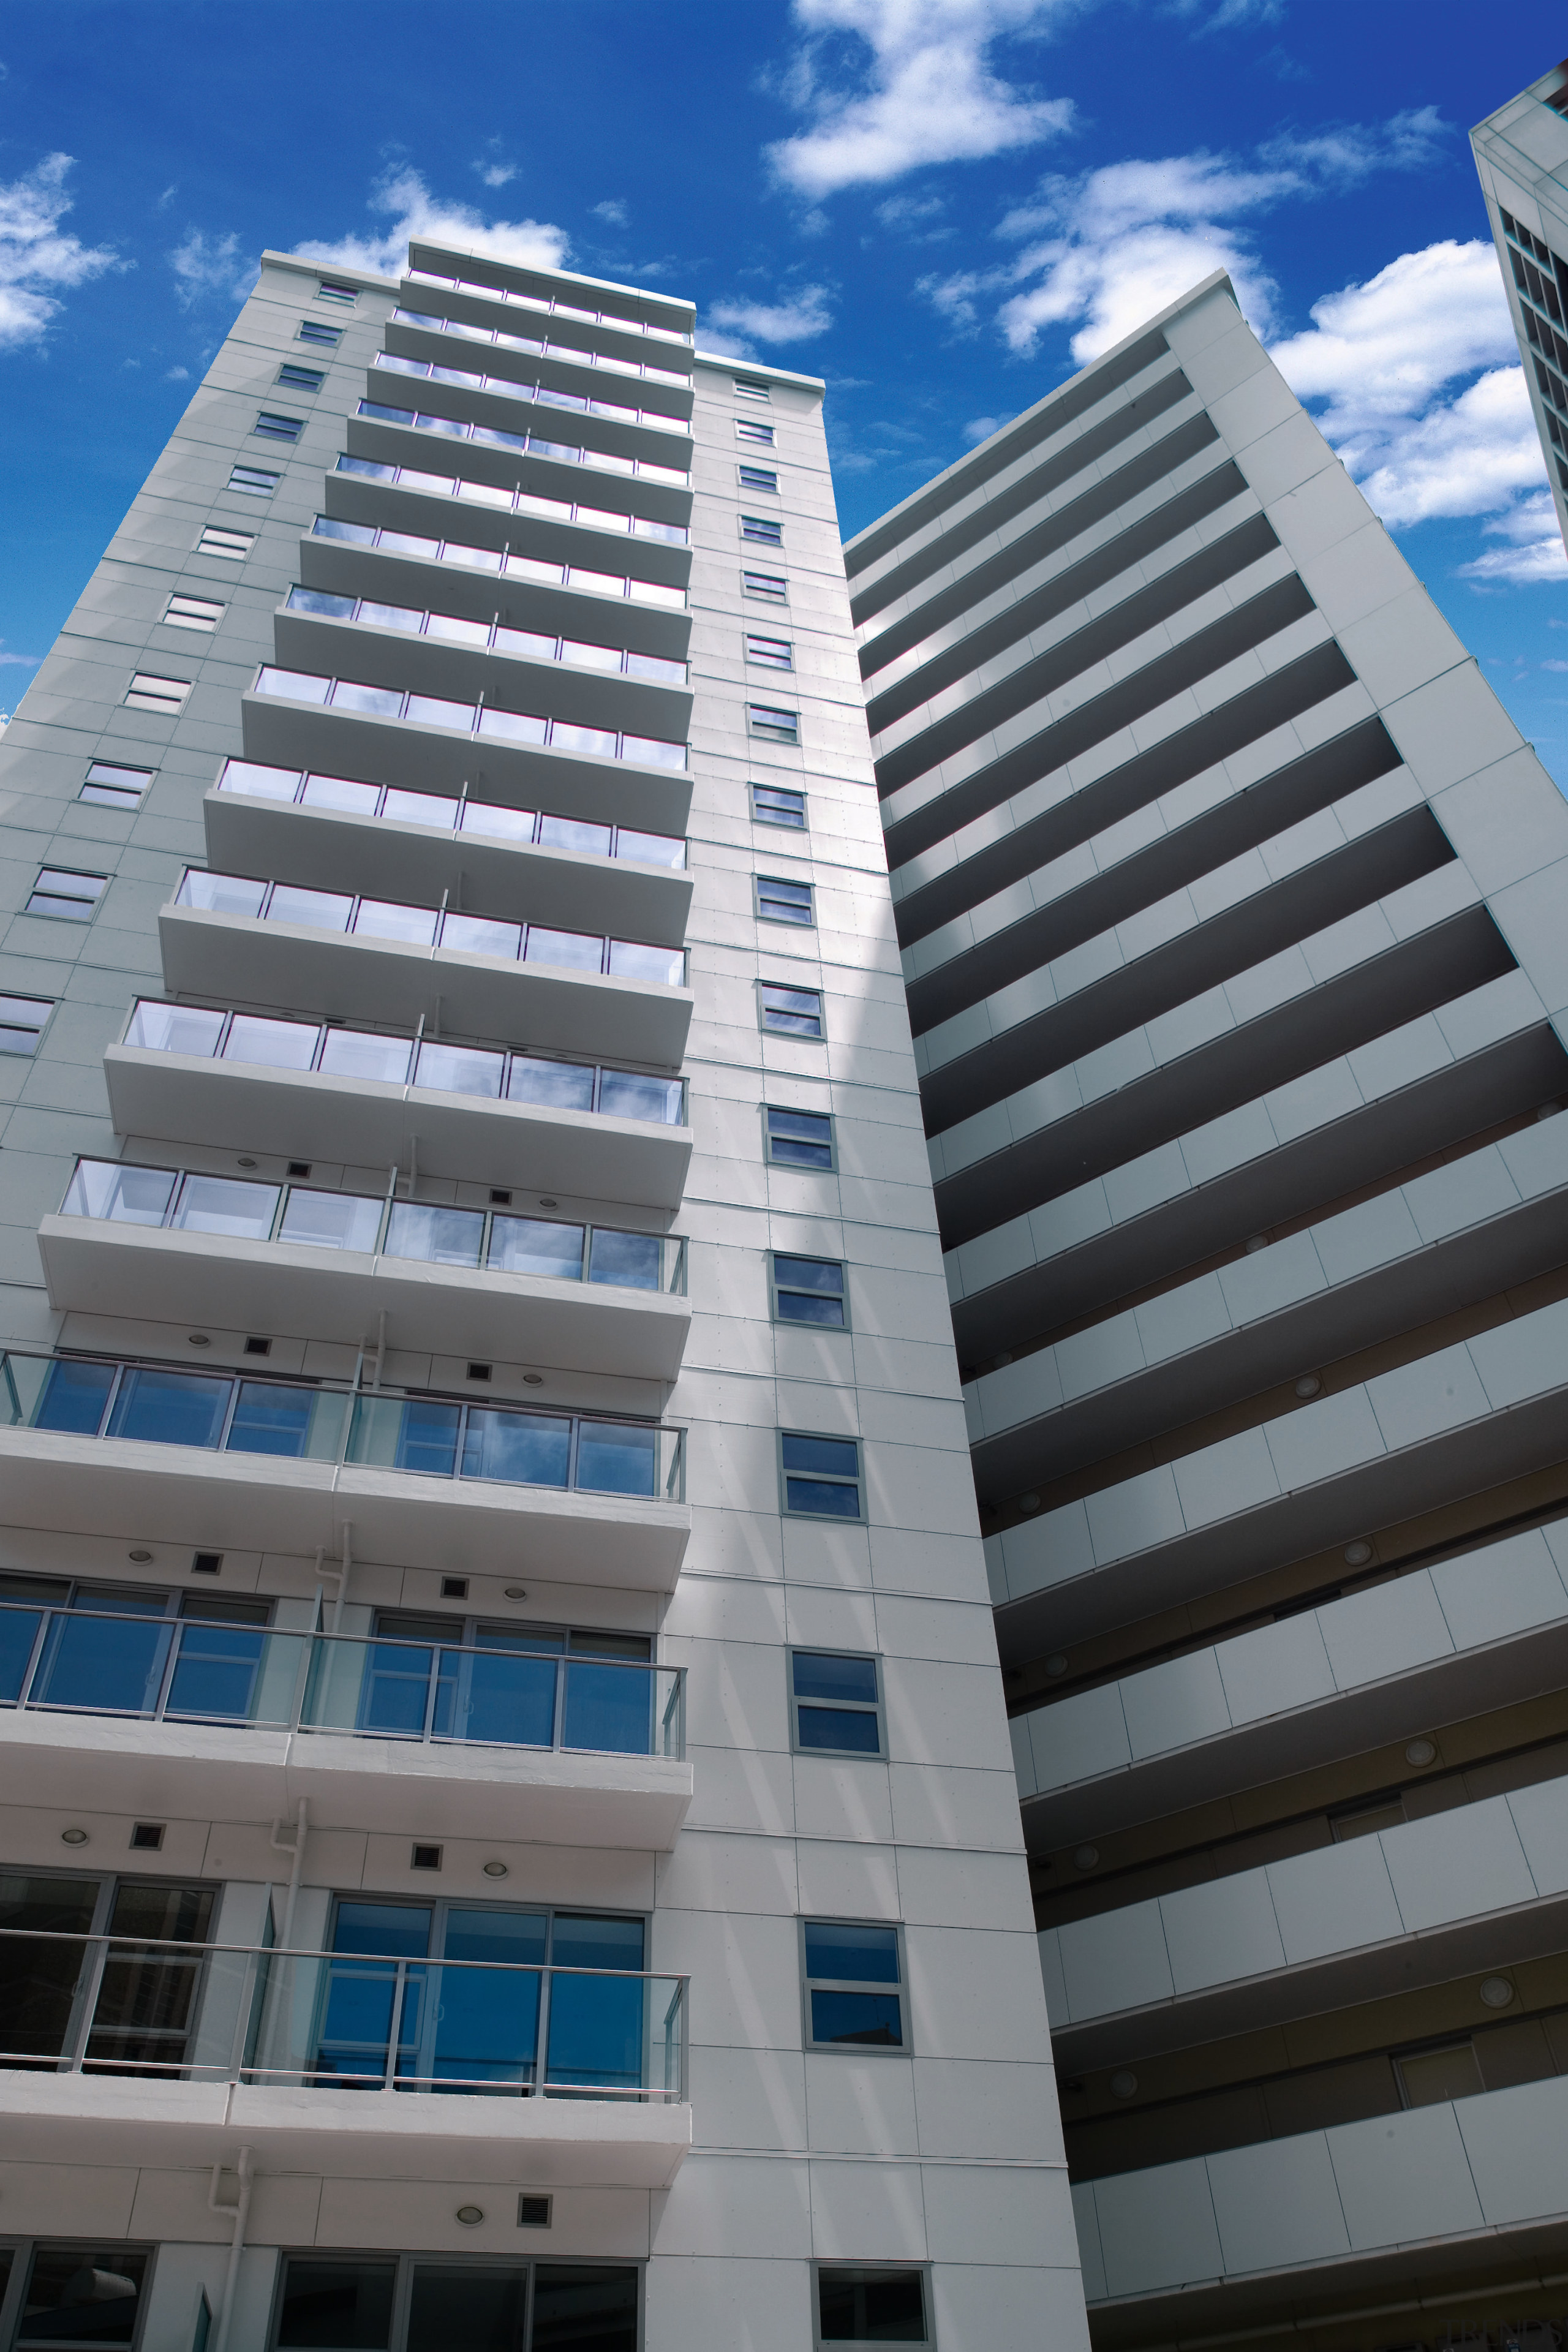 A view of some cladding by PBS Group. apartment, architecture, building, commercial building, condominium, corporate headquarters, daytime, facade, headquarters, hotel, metropolis, metropolitan area, mixed use, property, real estate, residential area, sky, skyscraper, tower block, gray